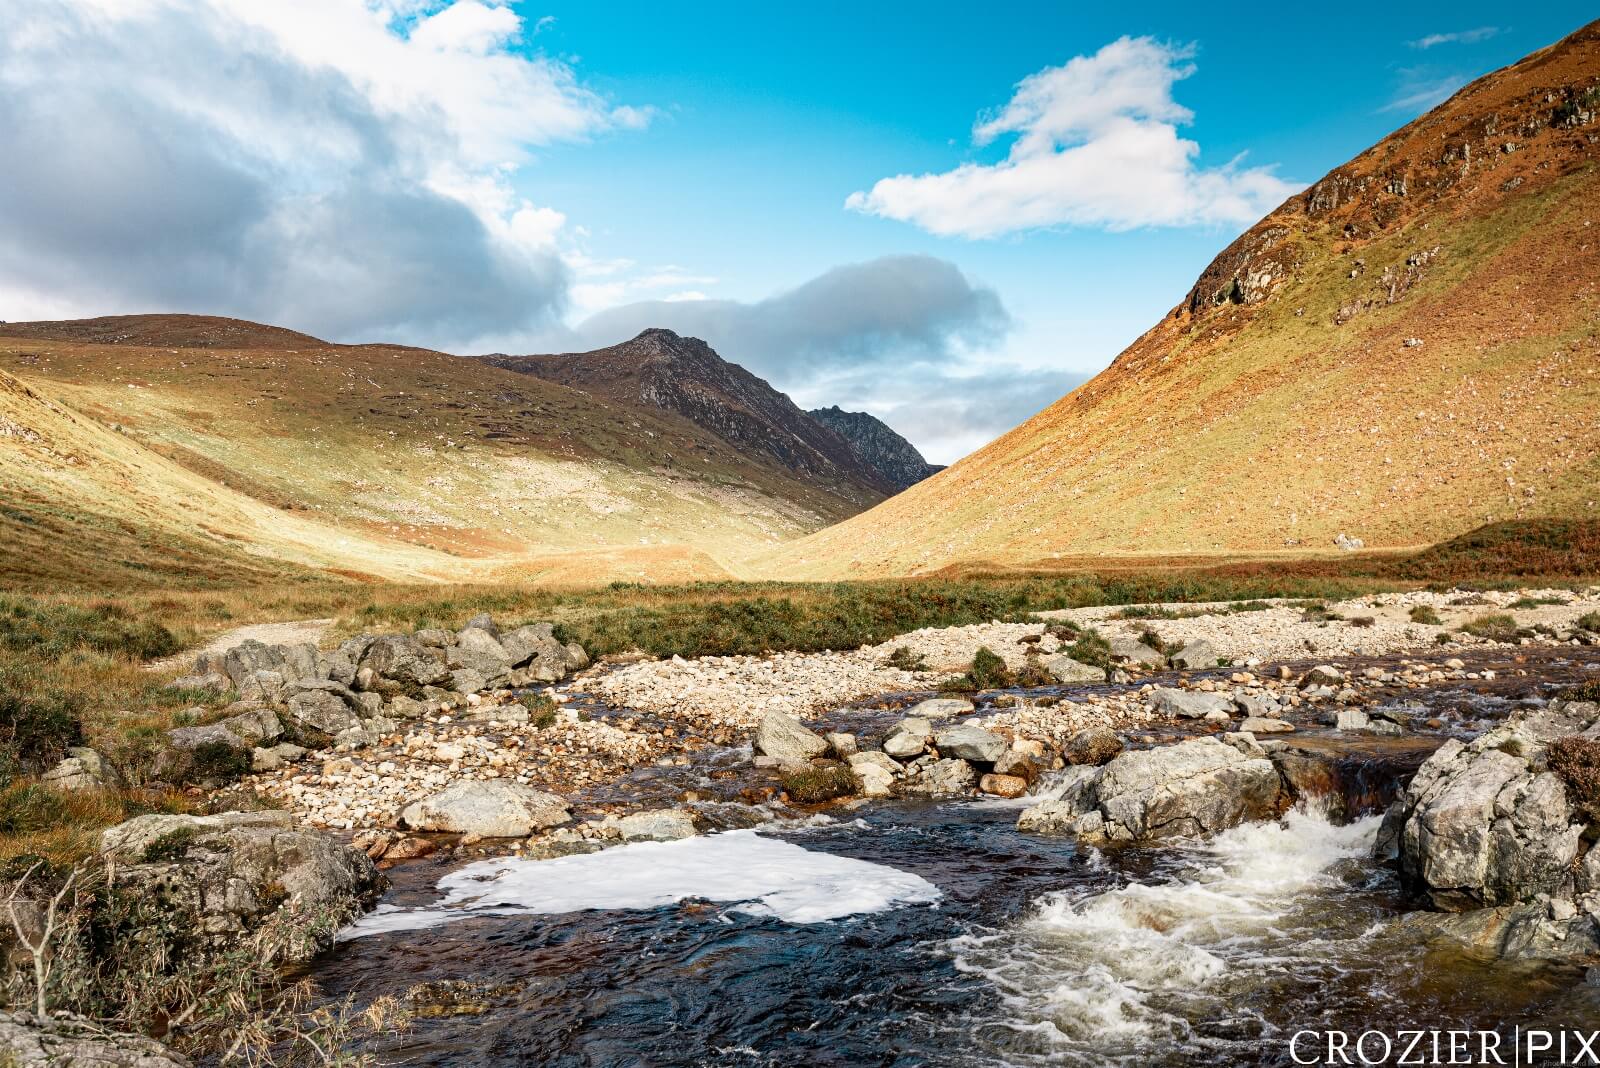 Image of Glen Rosa by Alan Crozier